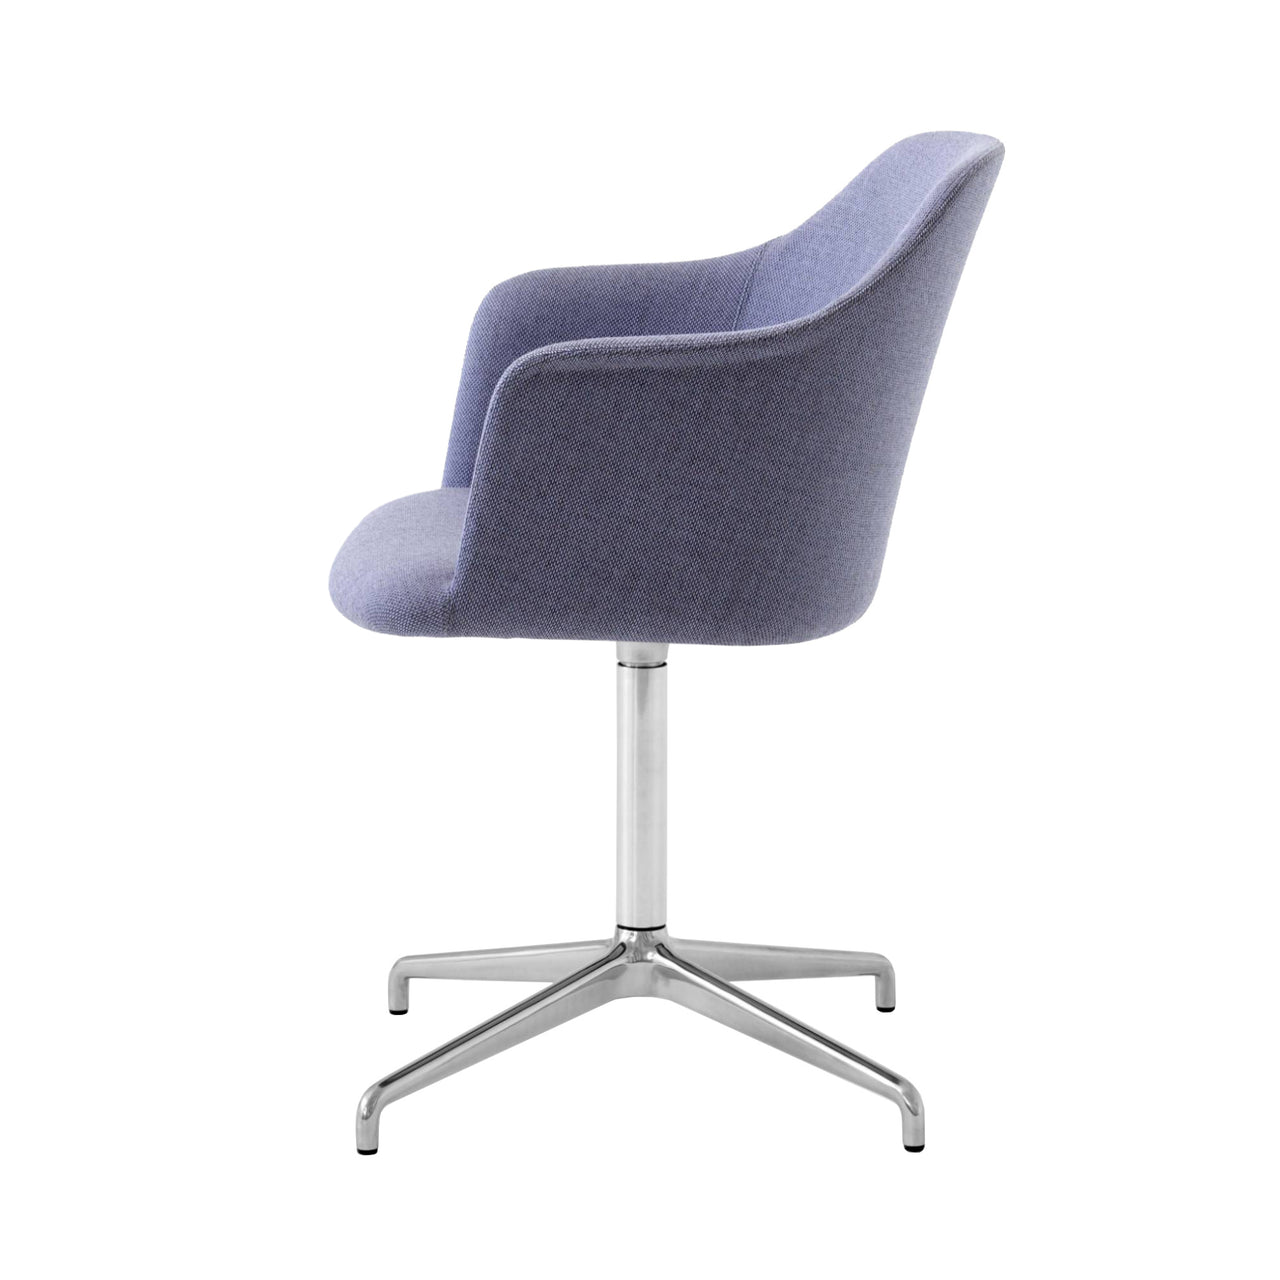 Rely Chair HW45: Polished Aluminum